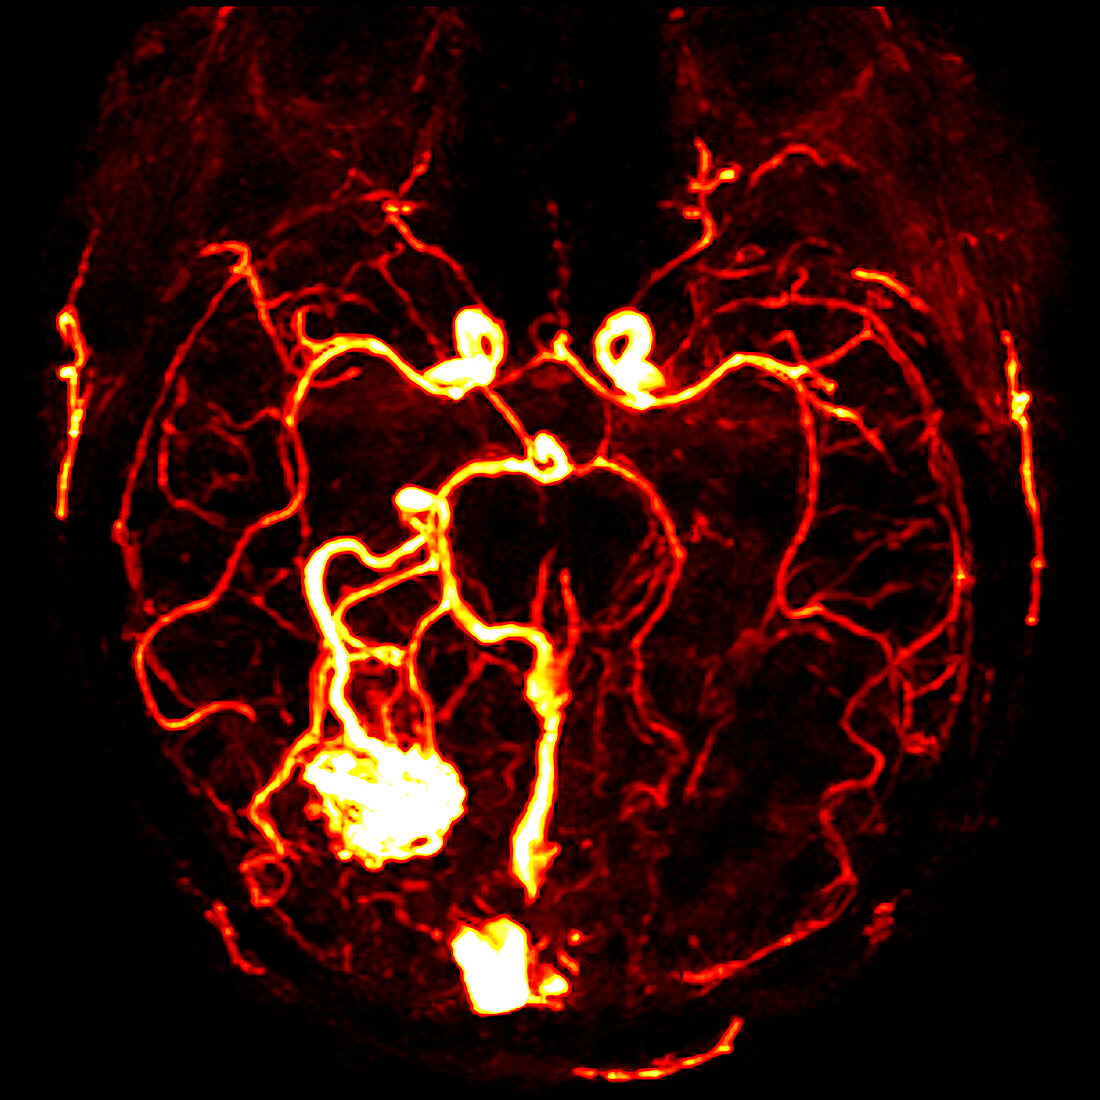 Arteriovenous malformation, CT scan